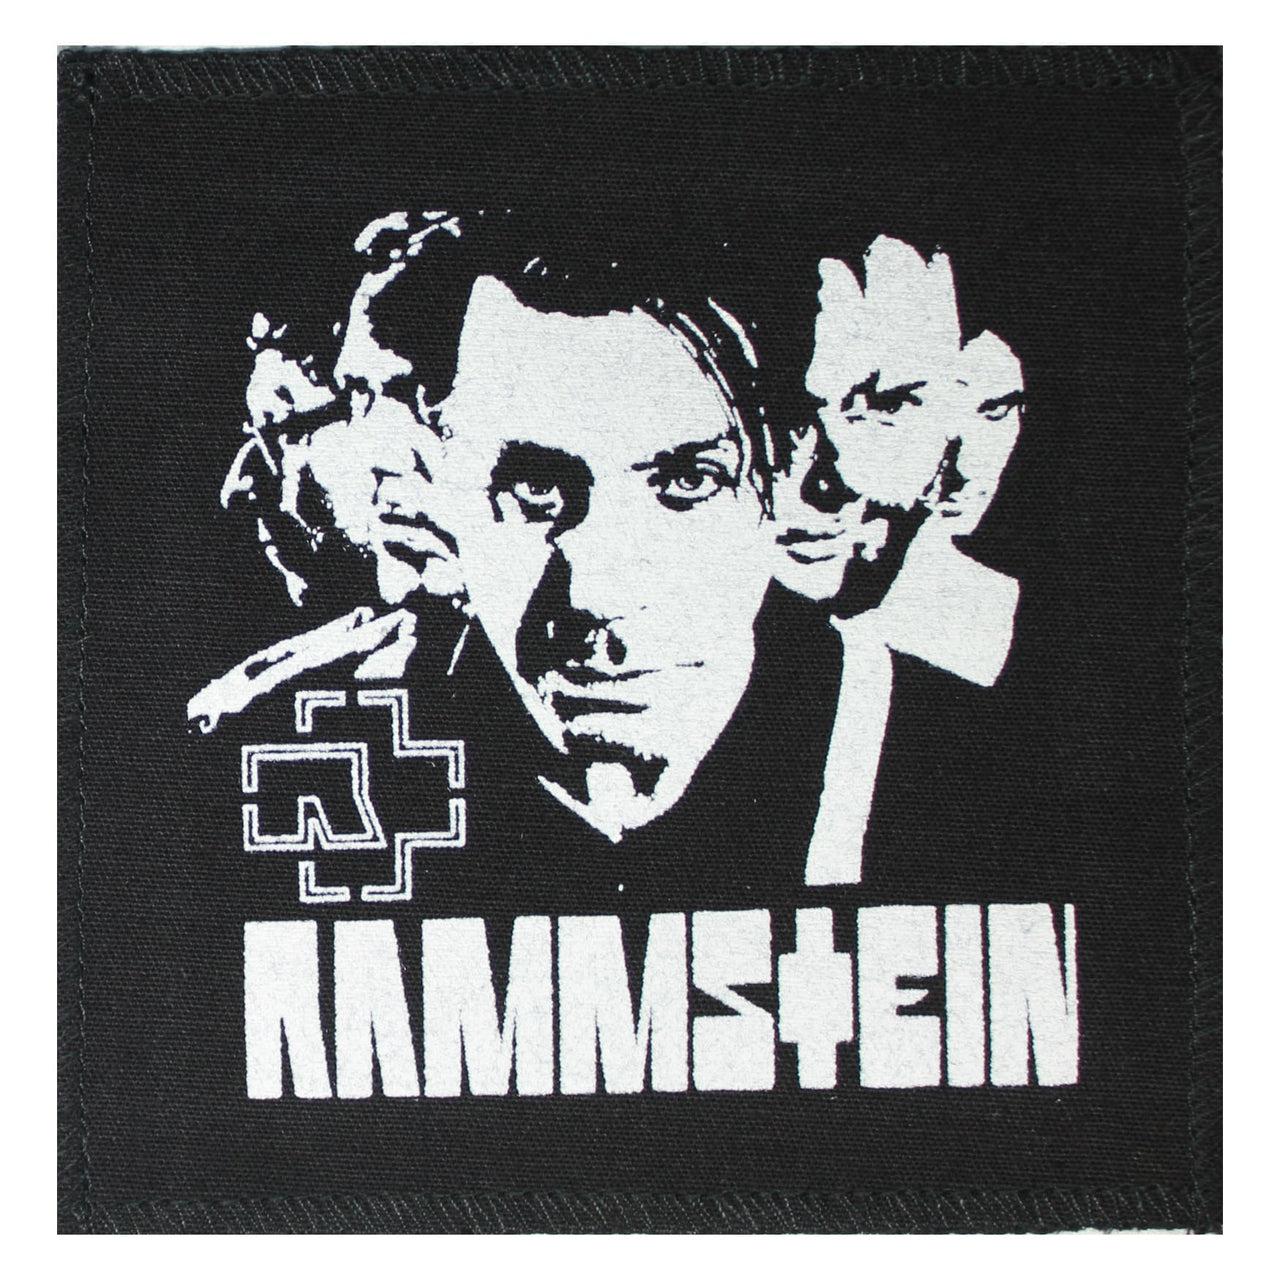 Rammstein Band Photo Cloth Patch